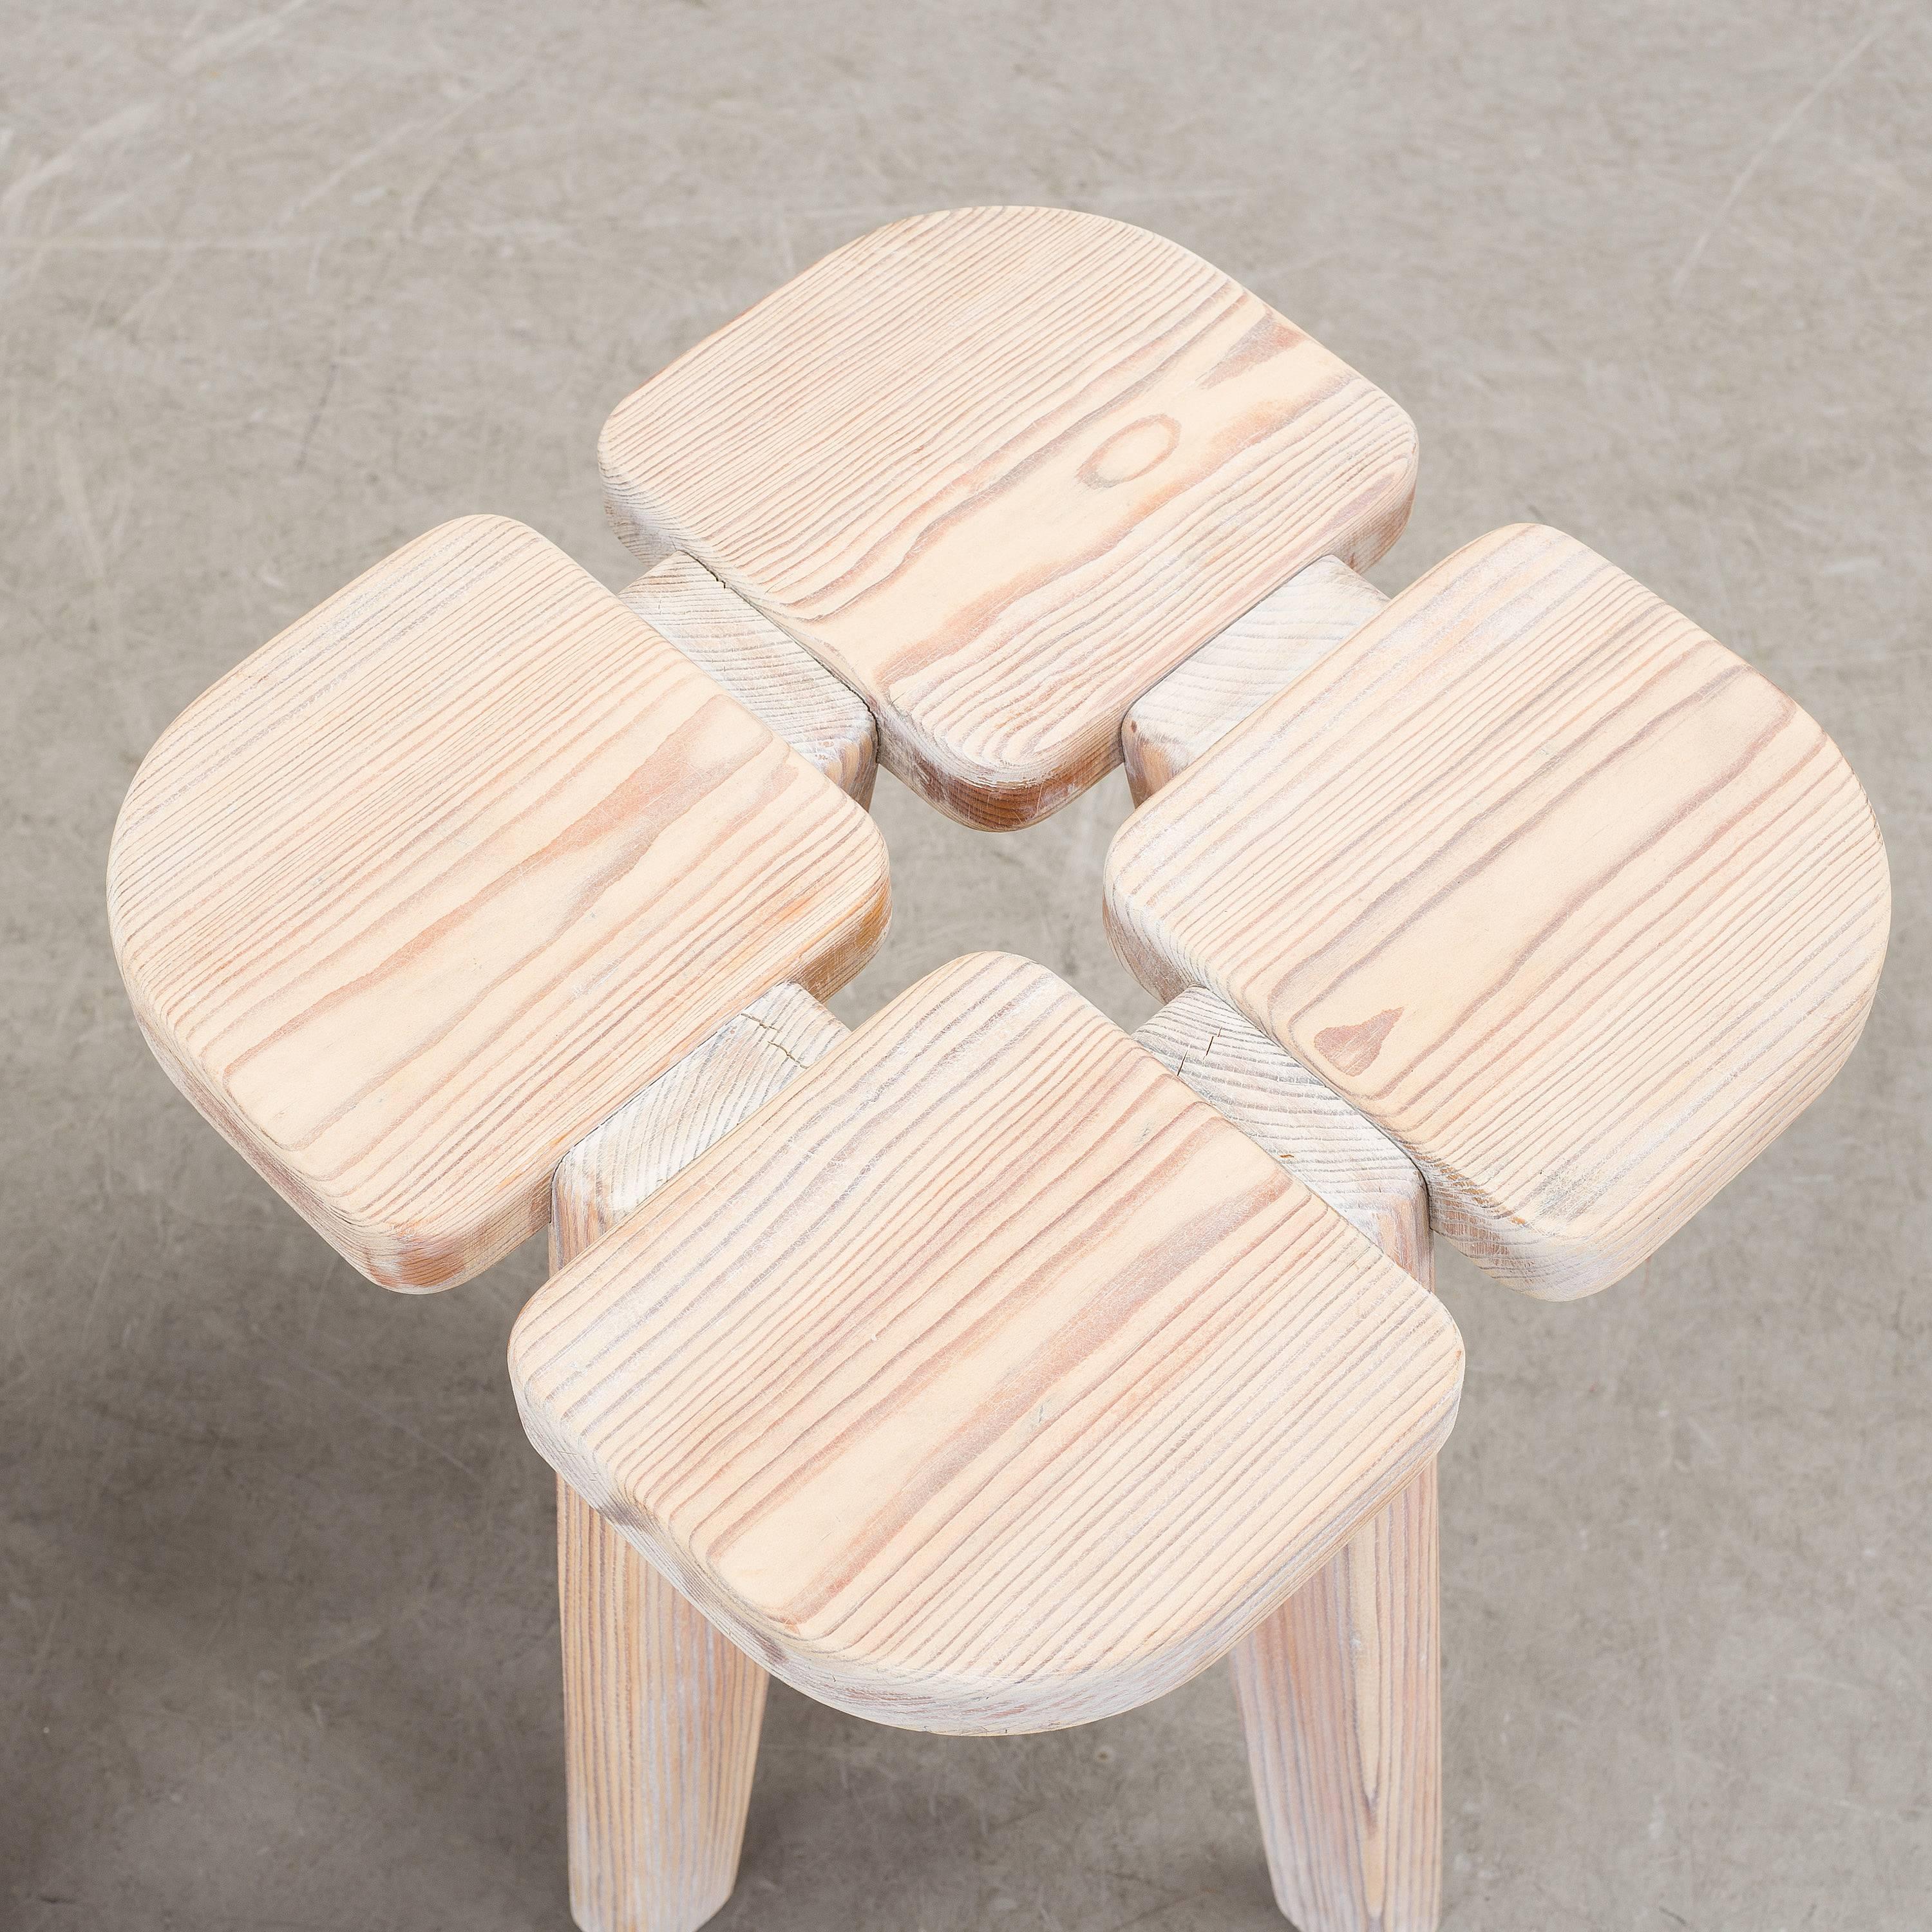 A pair of stools by Lisa Johansson-Pape, Stockman Orno, Finland, 1950s.
Measures: Height ca 40 cm.